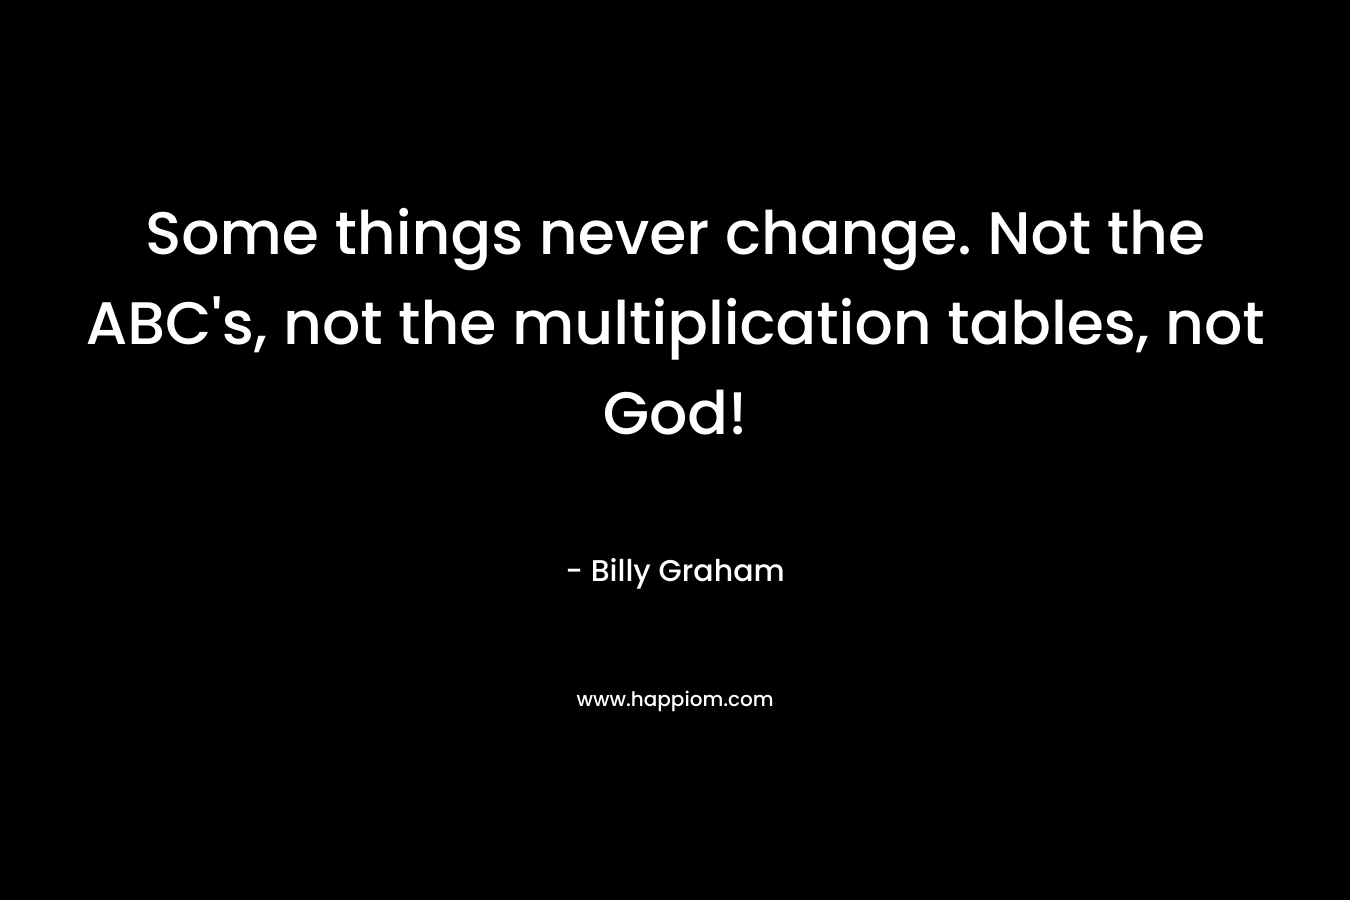 Some things never change. Not the ABC's, not the multiplication tables, not God!